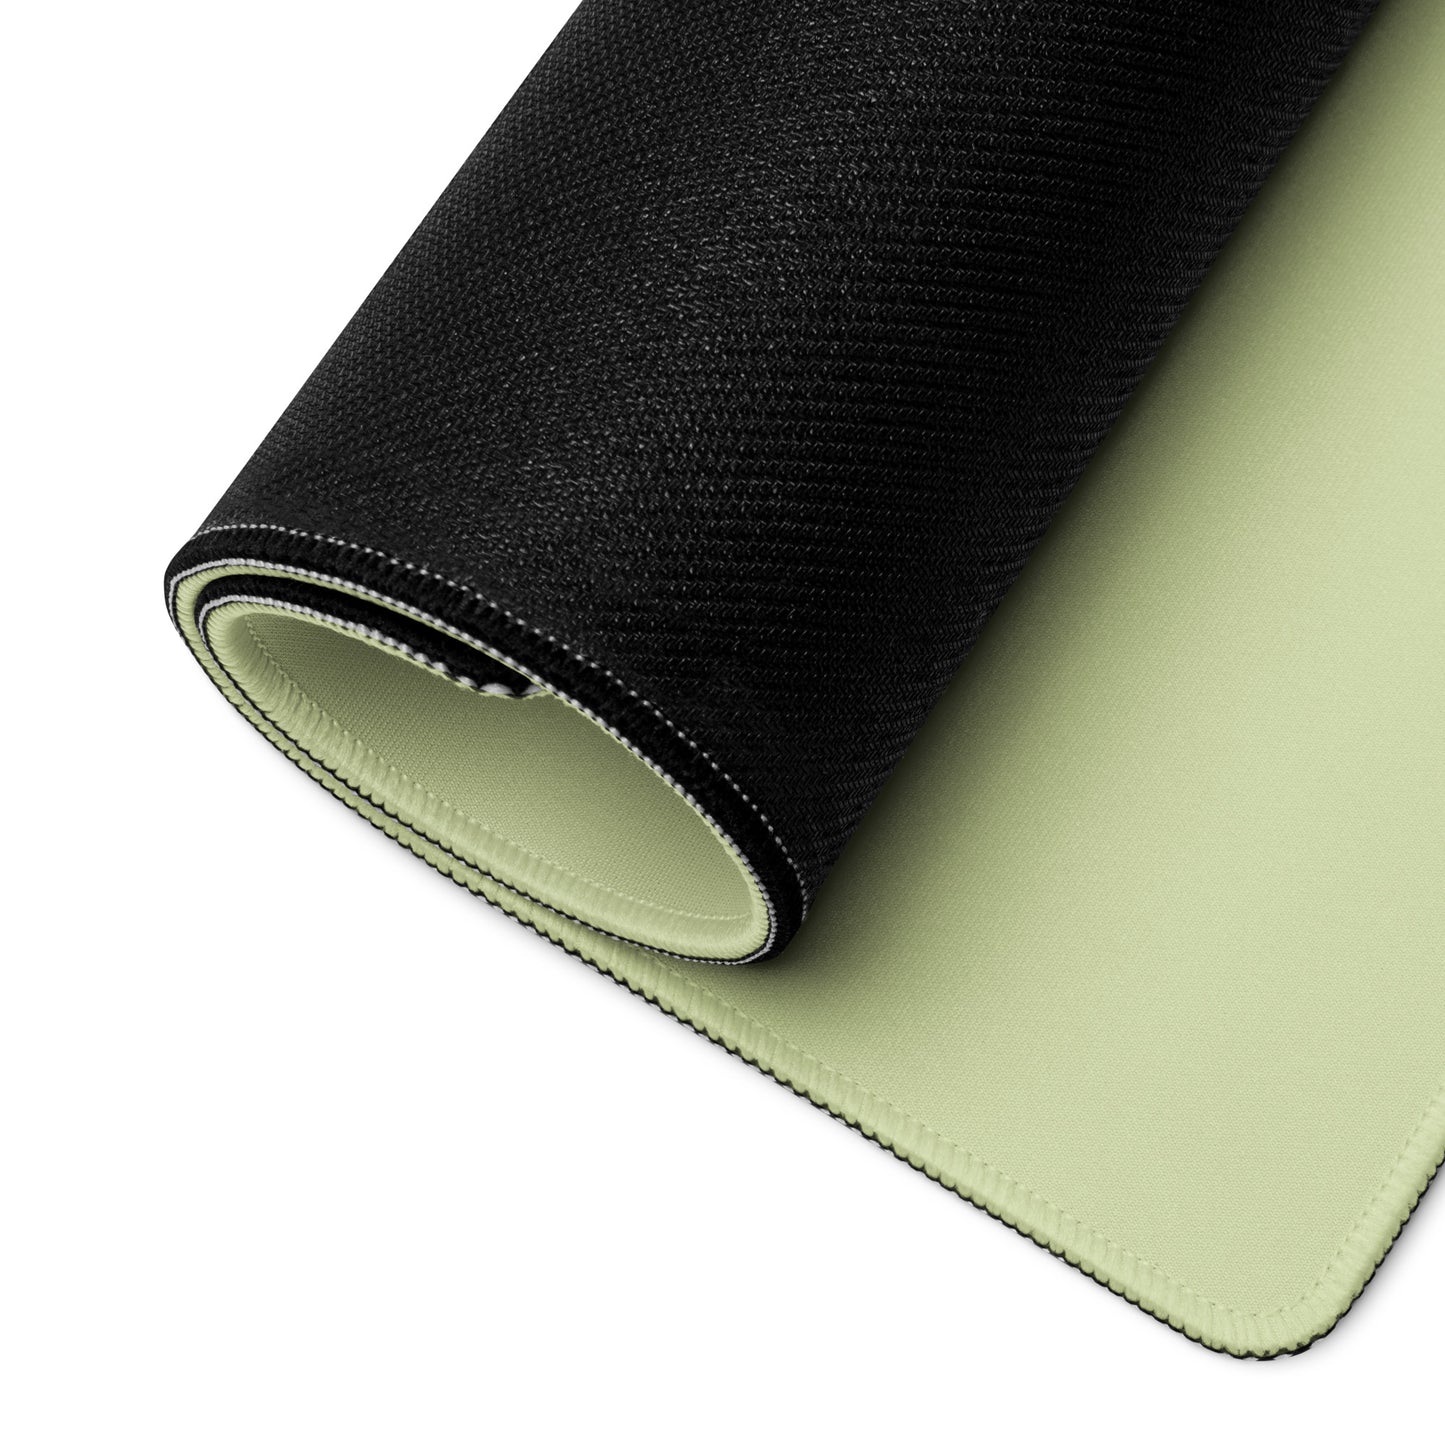 A 36" x 18" desk pad with a cute snail on it rolled up. Green in color.